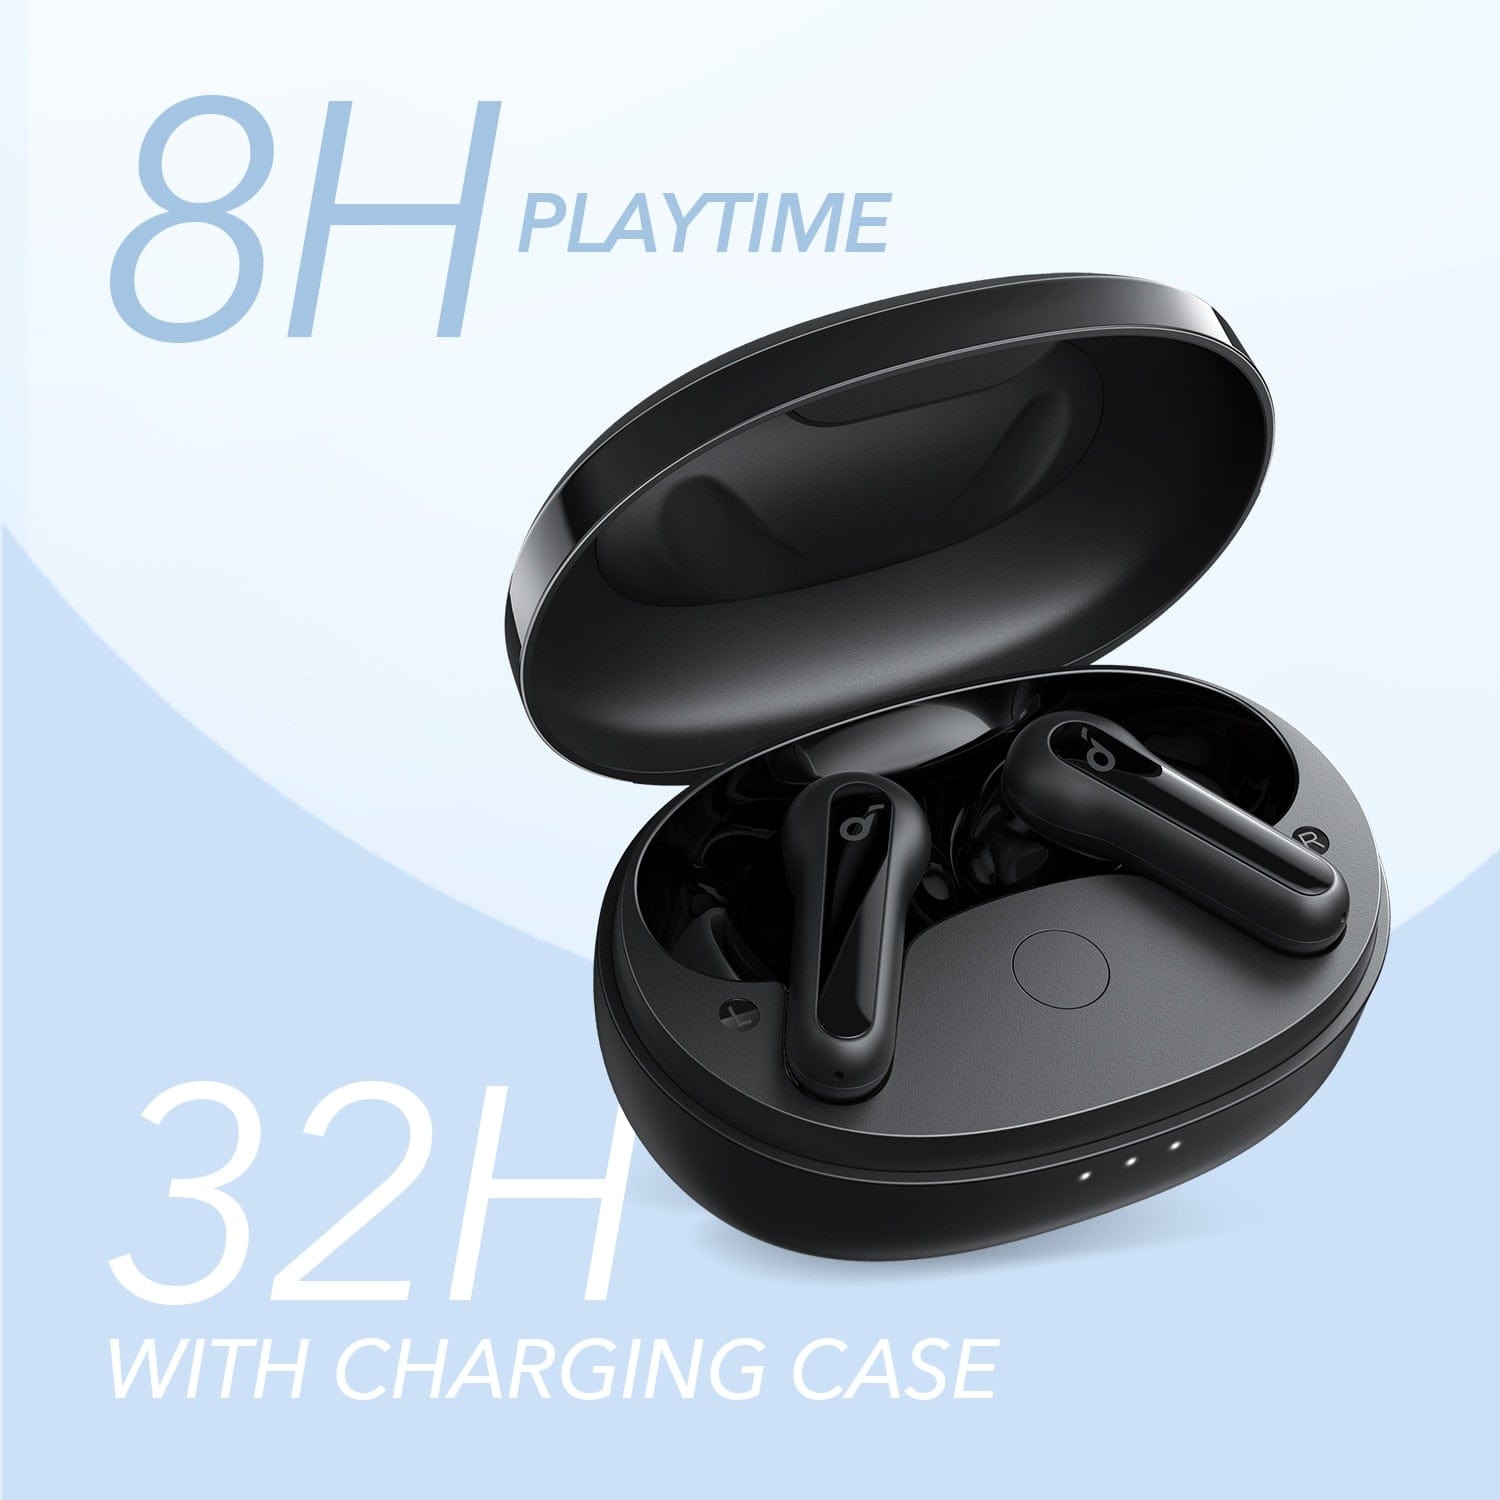 Soundcore Soundcore, Wireless Earbuds, Version Life P2 Mini True, Supports Bluetooth 5.2, Playtime up to 32 Hours, Color Blue